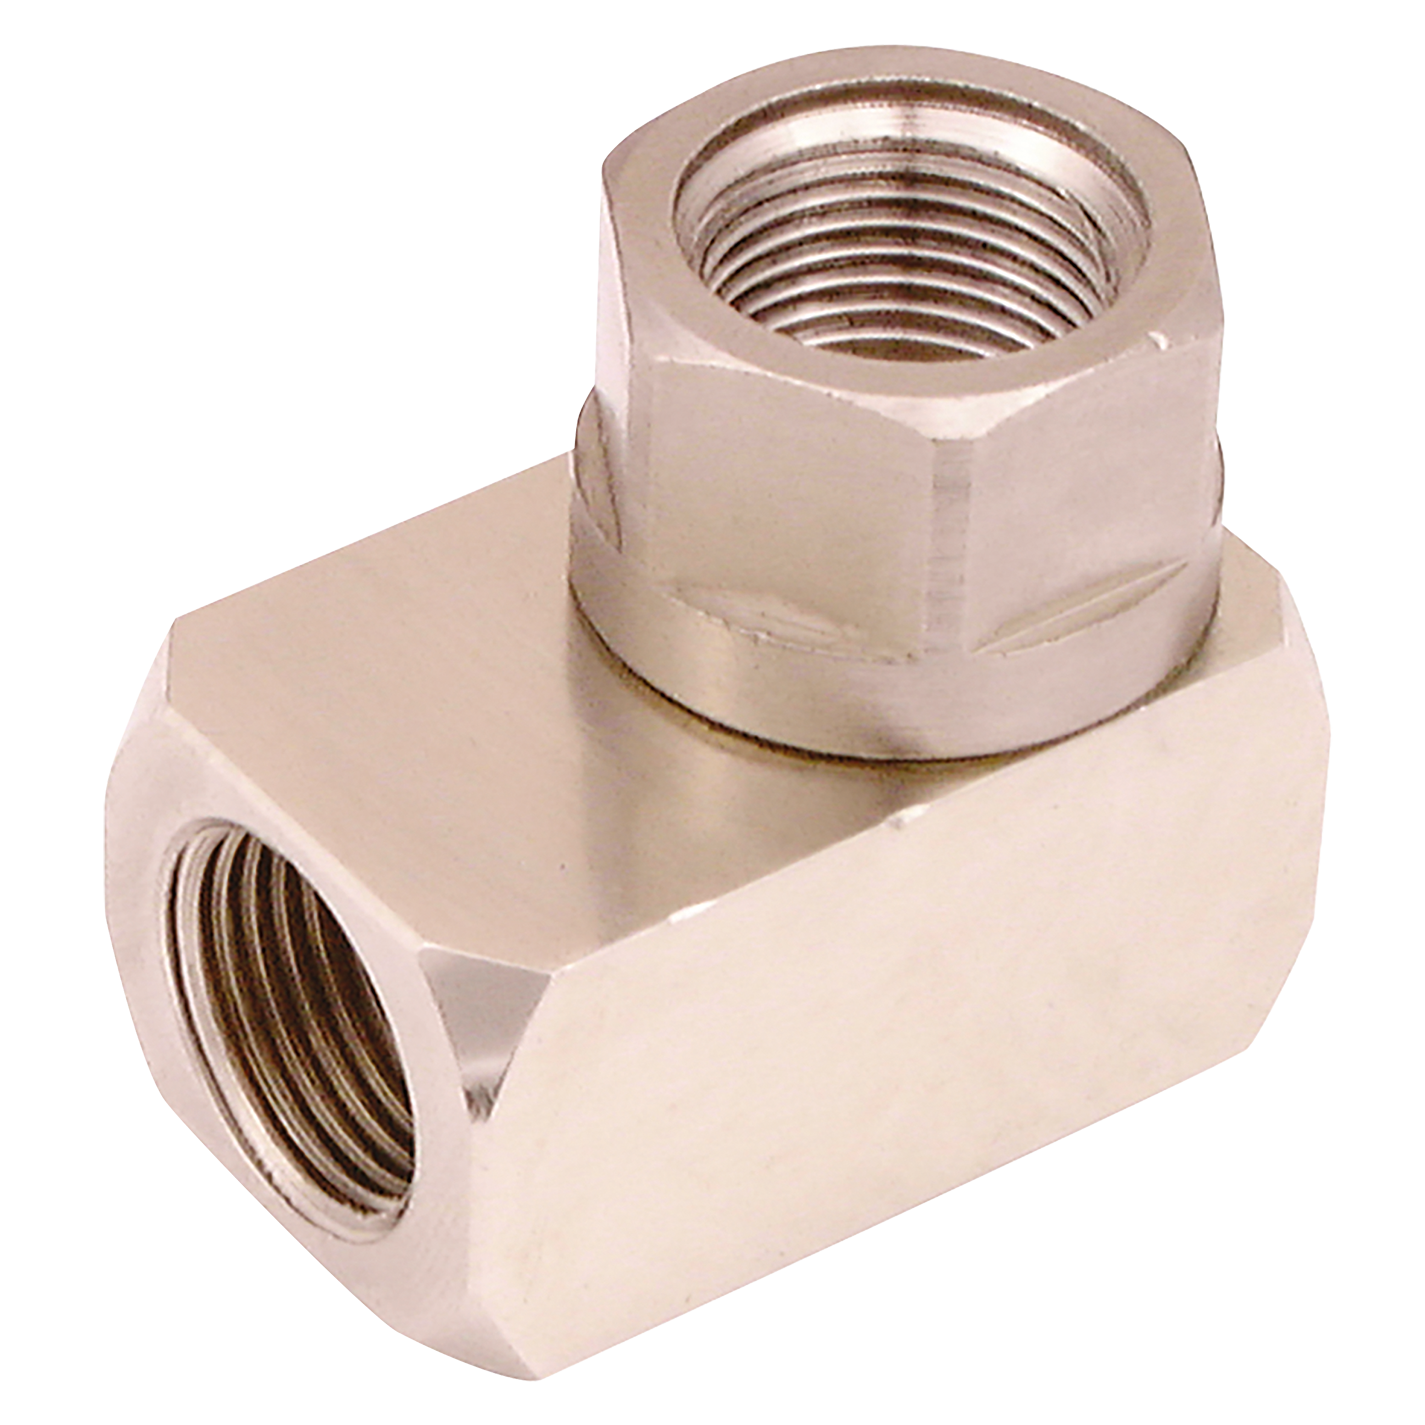 1 x 1/4" BSP Male Inlet x 1 x 1/4" BSP Female Outlets  Rotating Joint